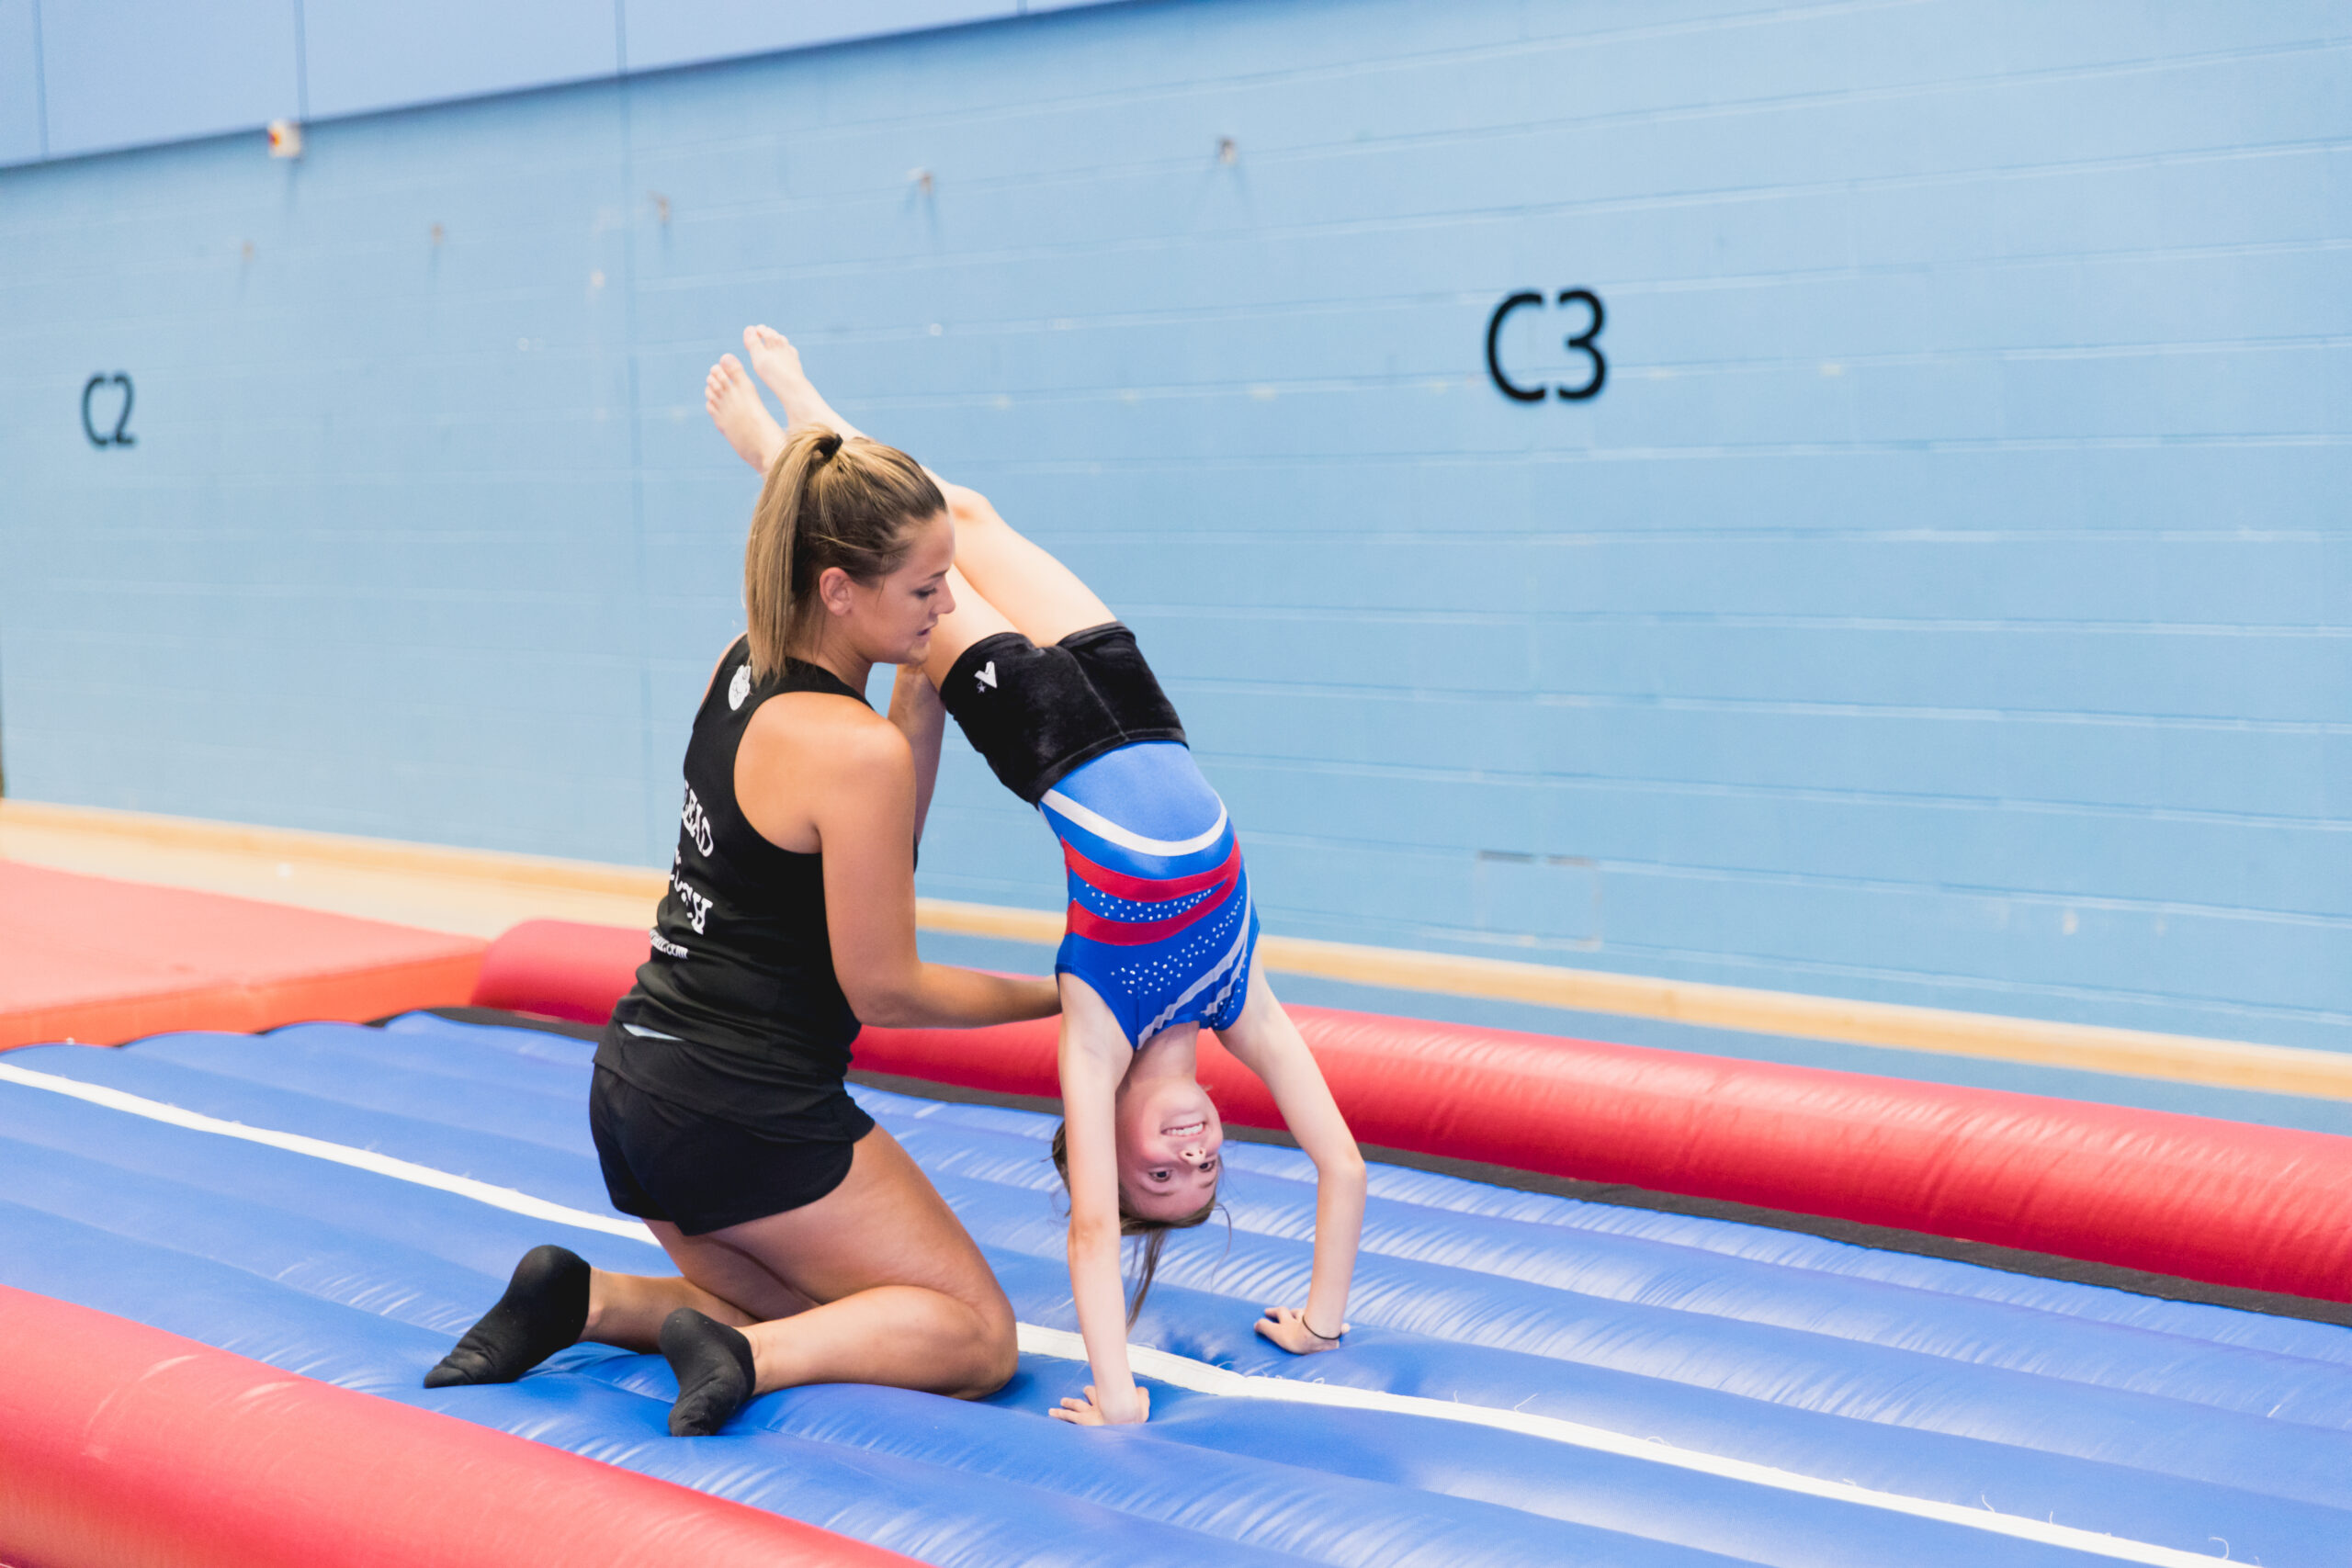 Flair gymnastics coach supports child safely on the air track